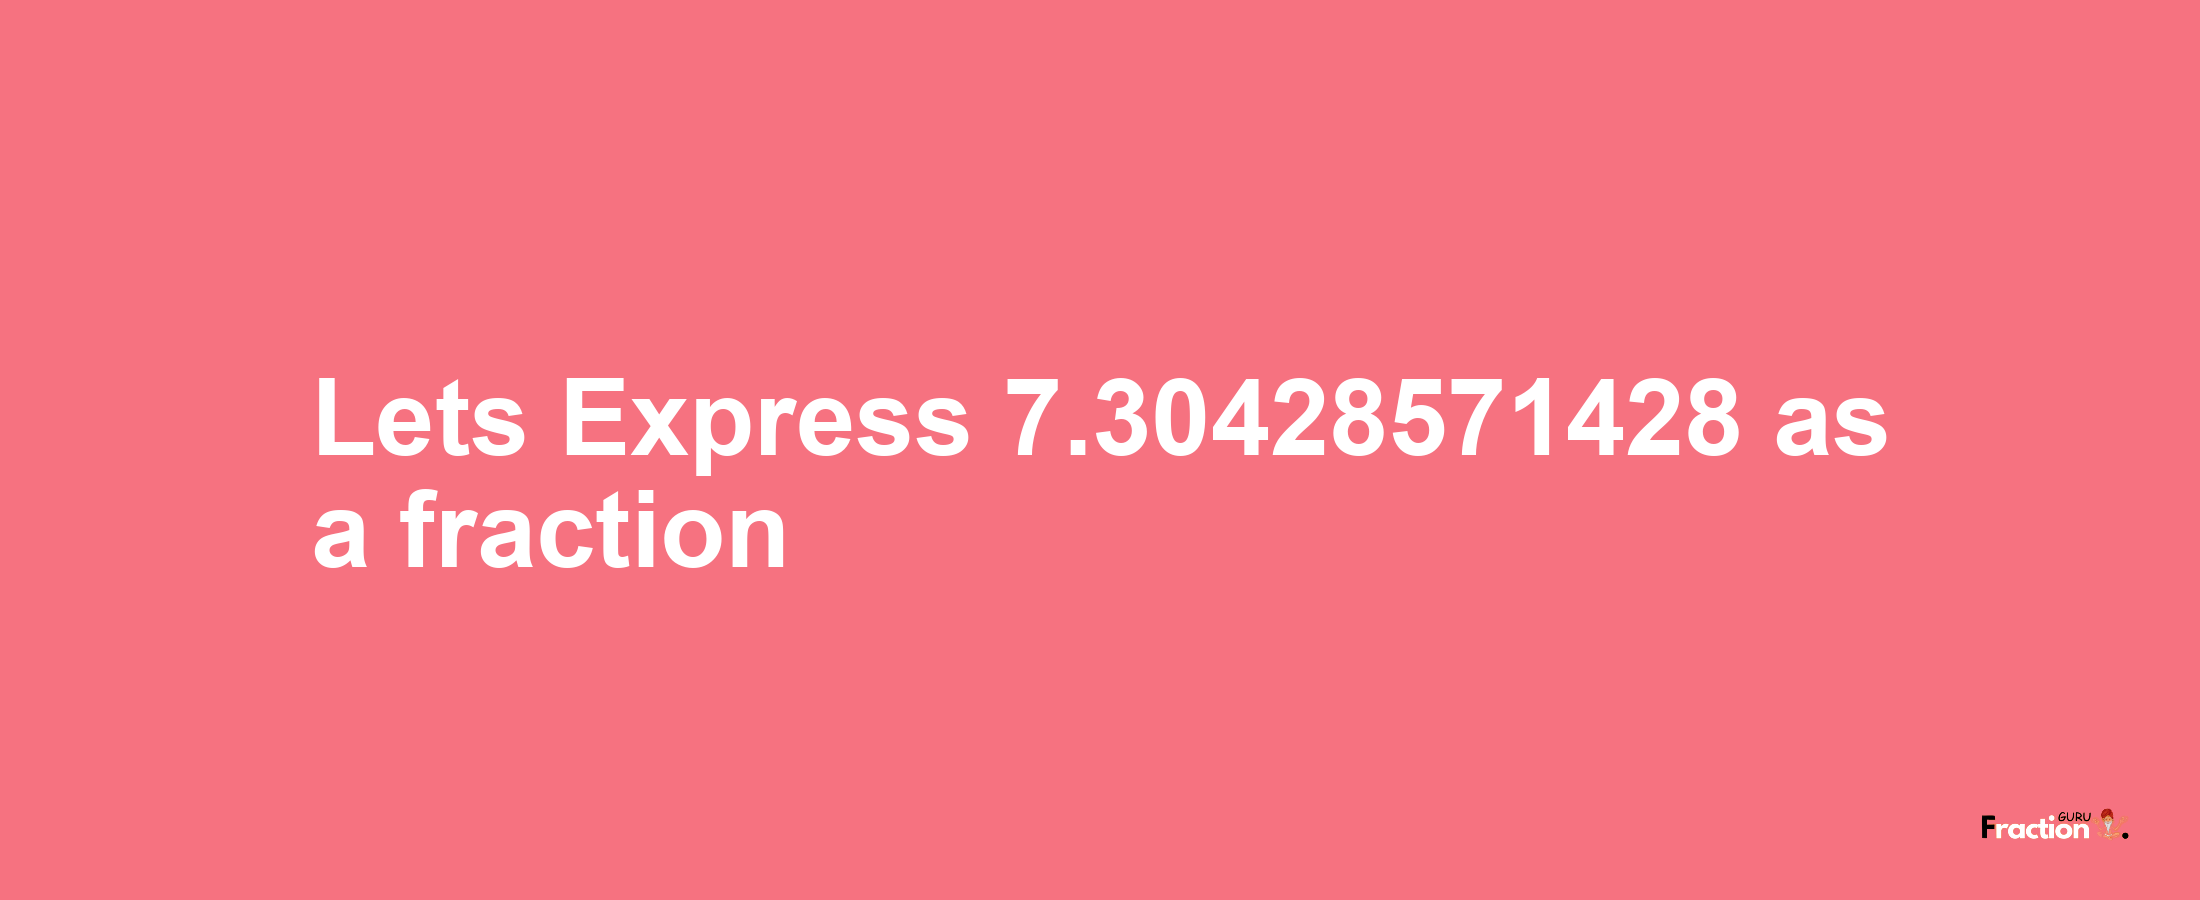 Lets Express 7.30428571428 as afraction